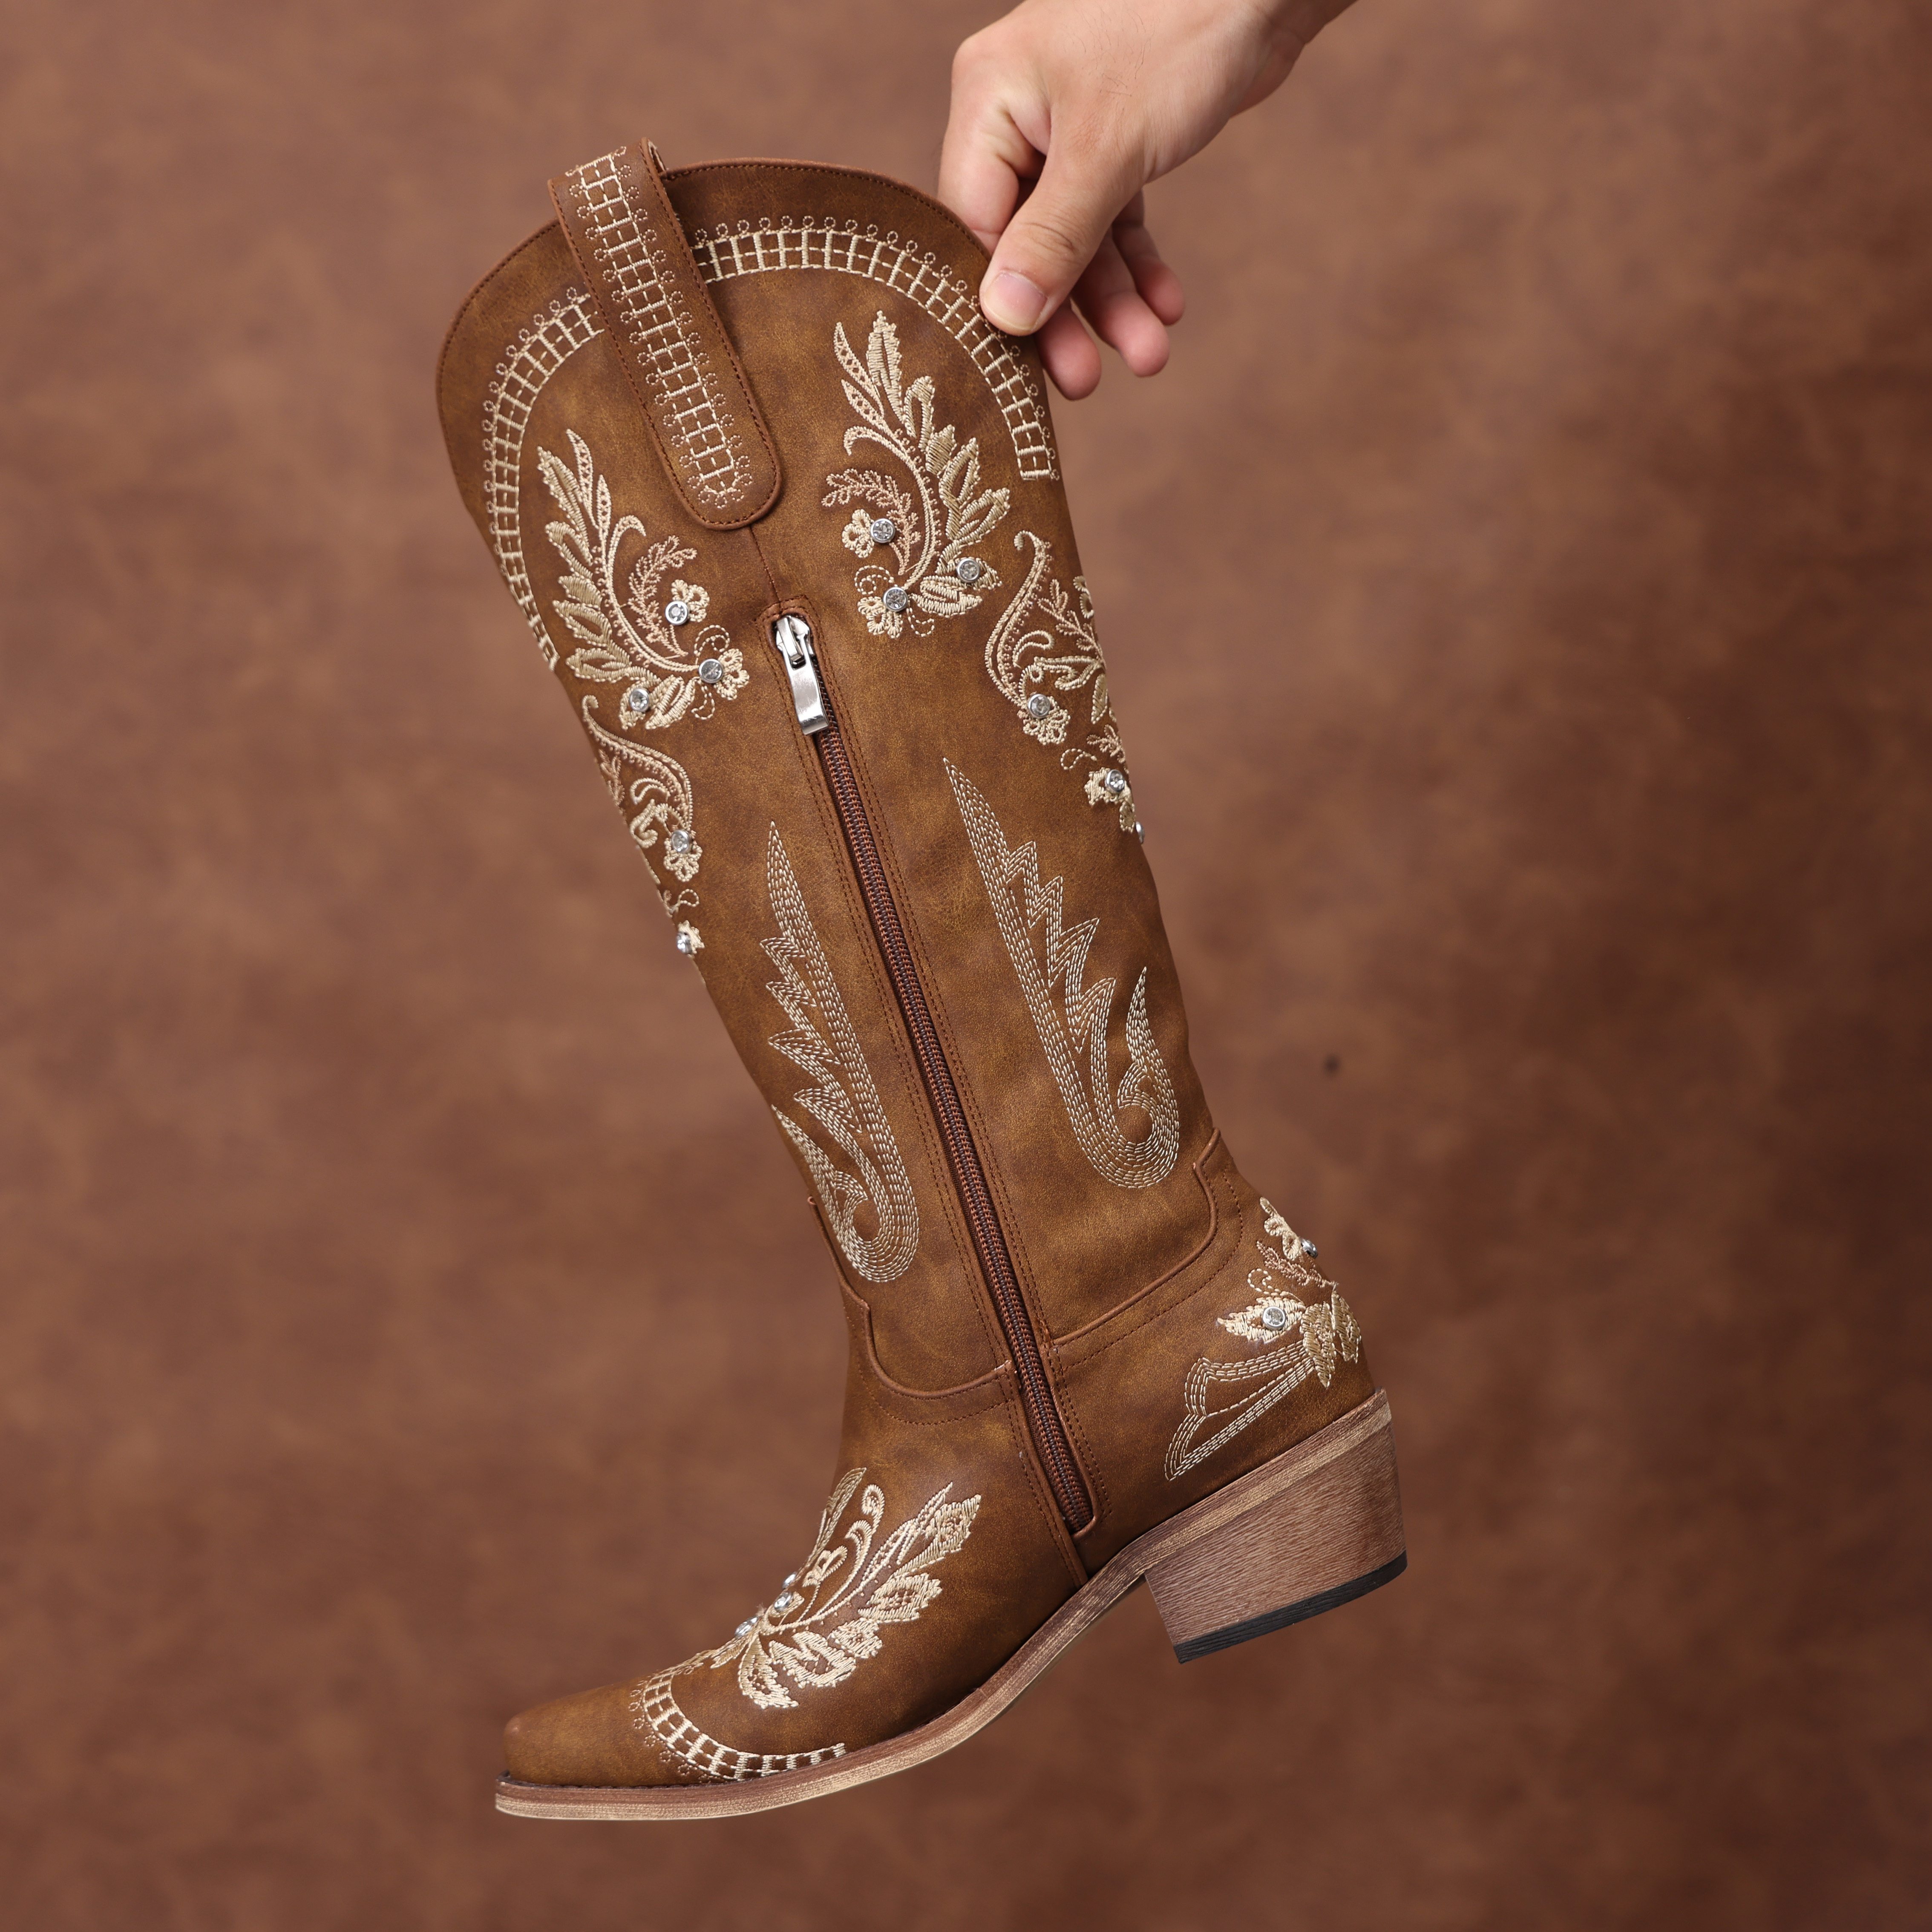 

Women's Brown Cowboy Boots: Sparkly Wide-calf Knee-high Cowgirl Style - Glitter Rhinestone Western Boots With Classic Embroidery, Pointed Toe, Zipper & Pull-on Design - Retro Fashion Tall Boots